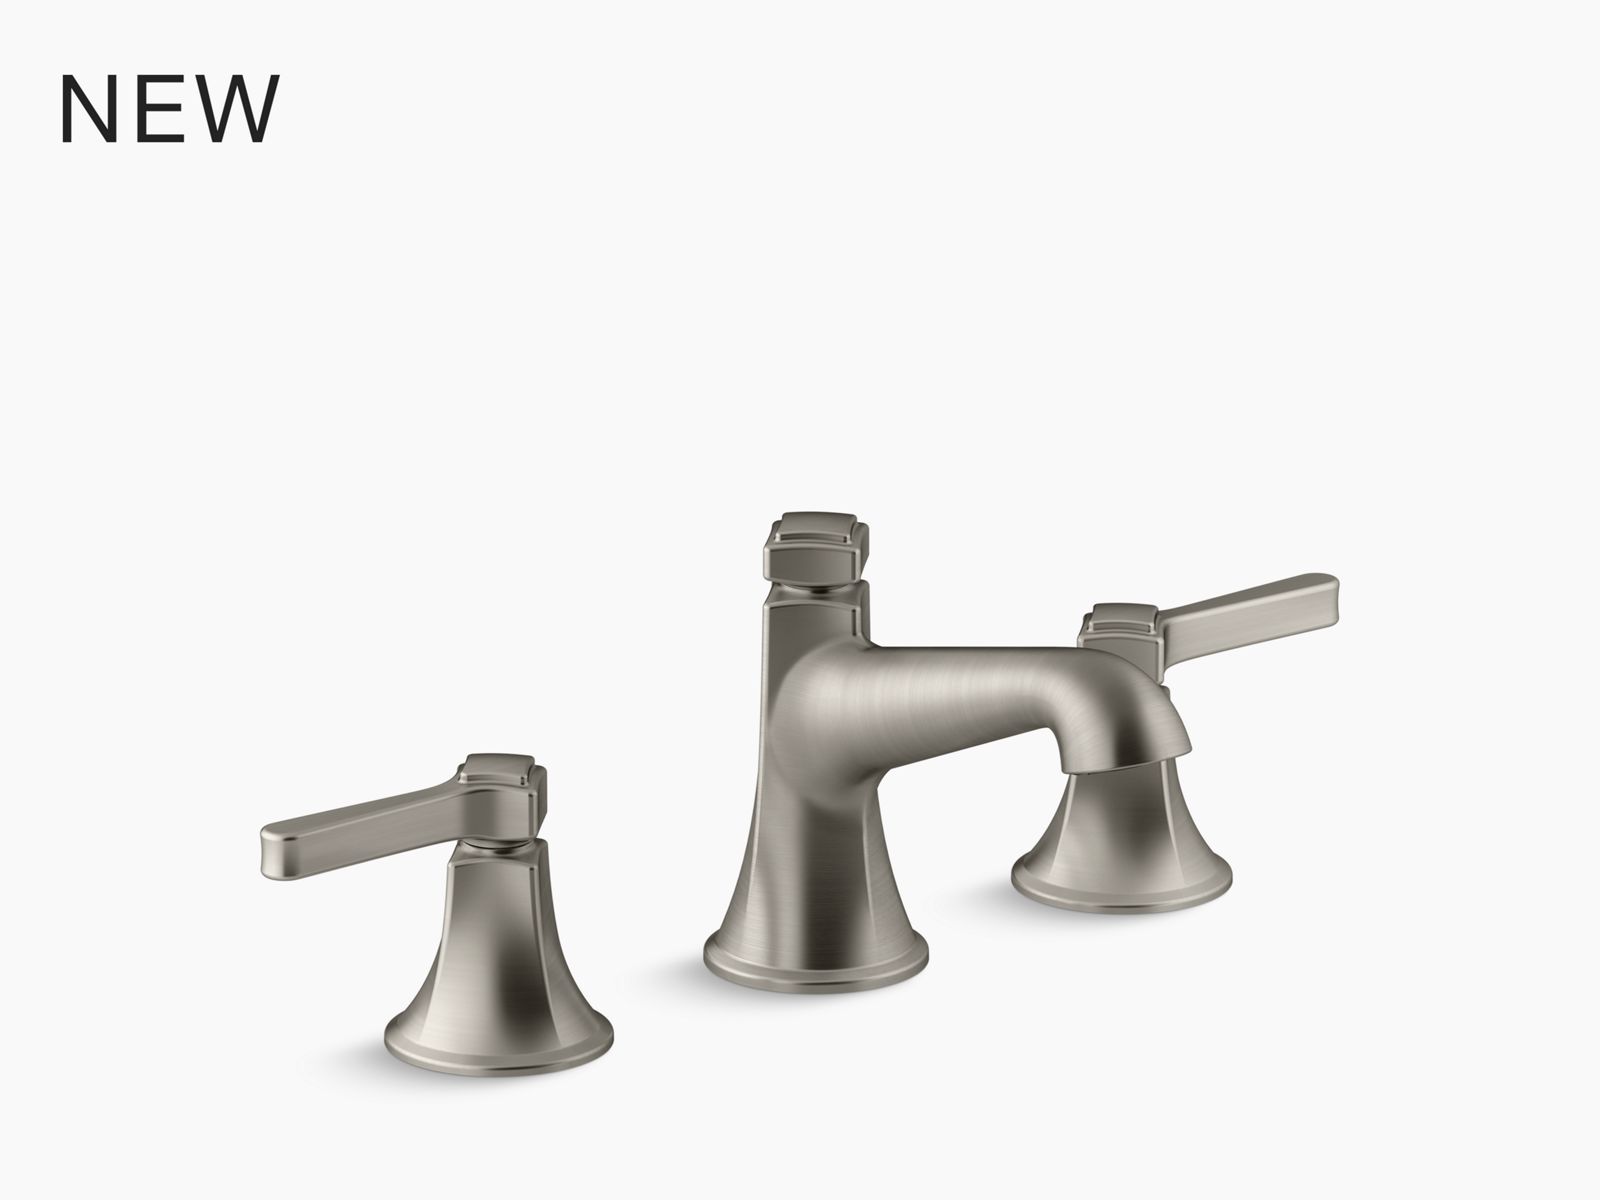 FINIAL Widespread Lavatory Faucet, Lever Handles With White Accents